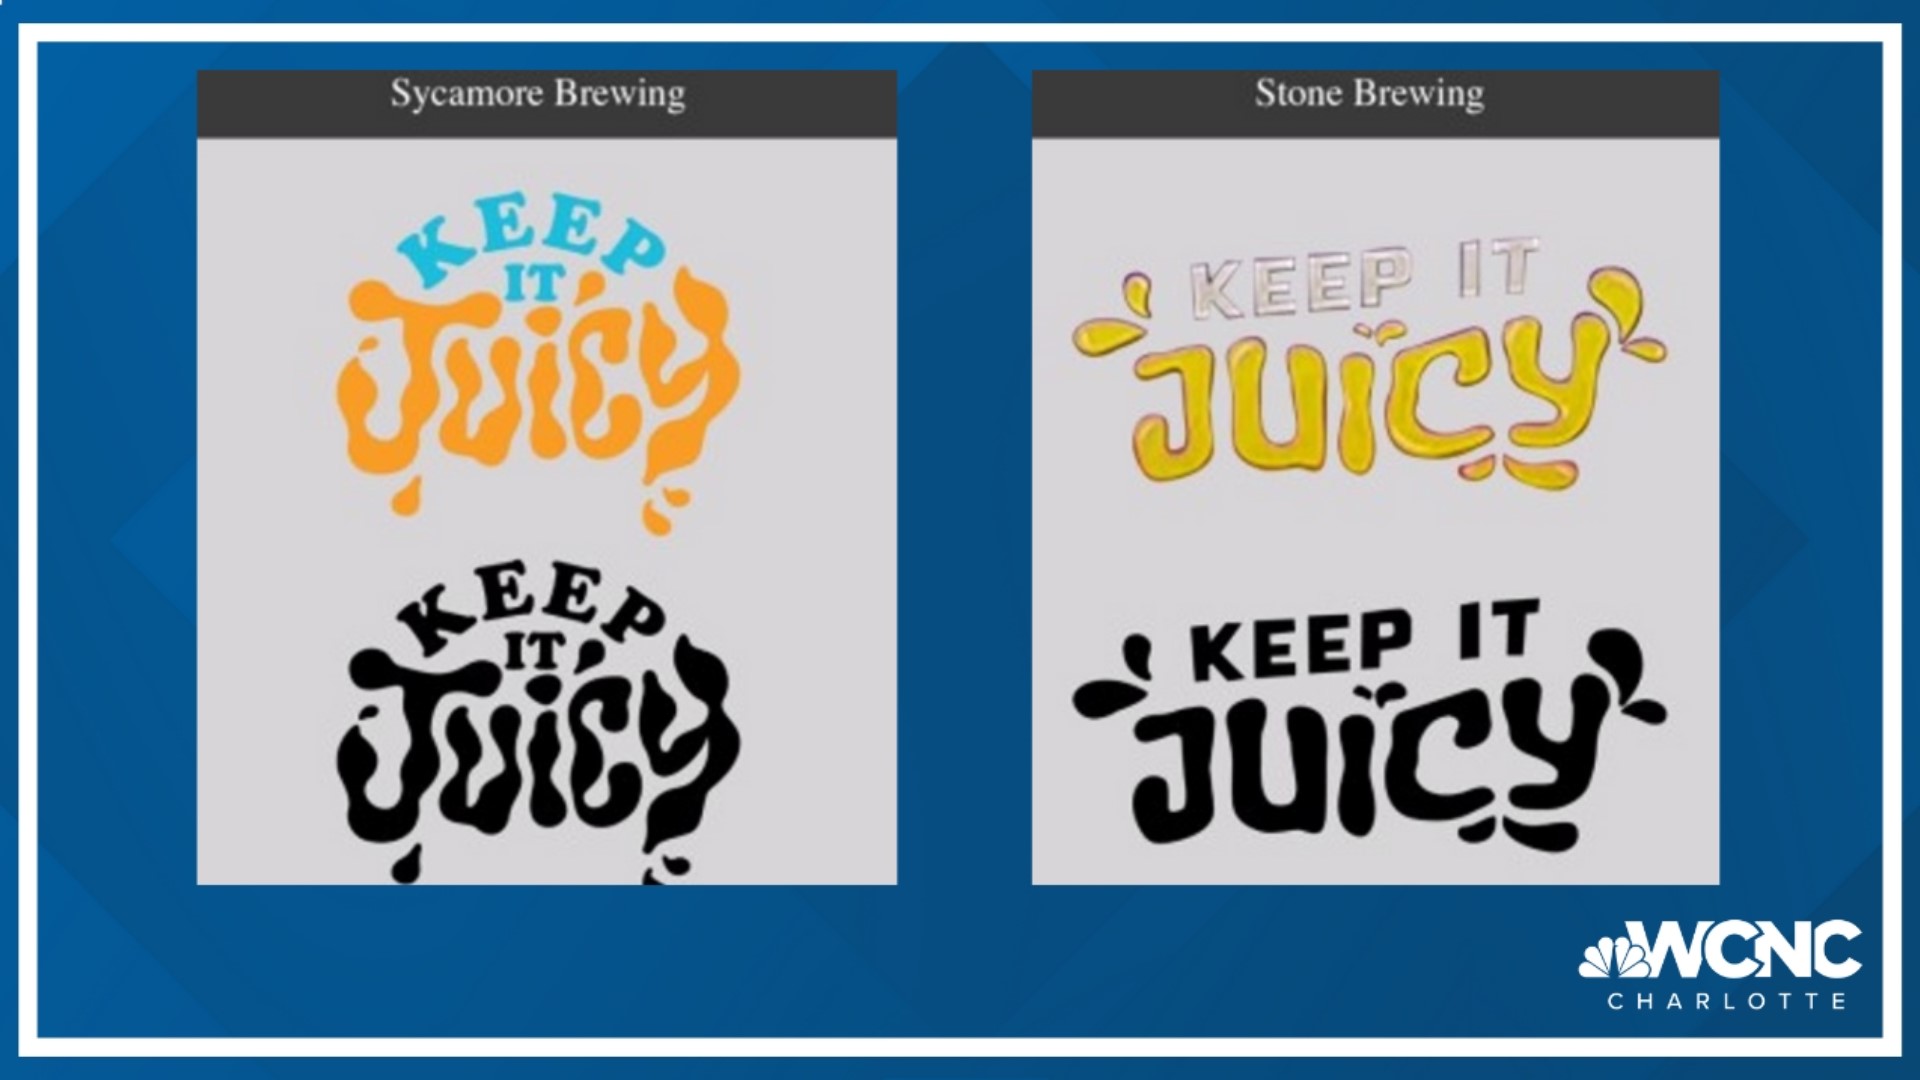 The lawsuit alleges Stone Brewing Company stole the registered trademark "KEEP IT JUICY" from Sycamore.